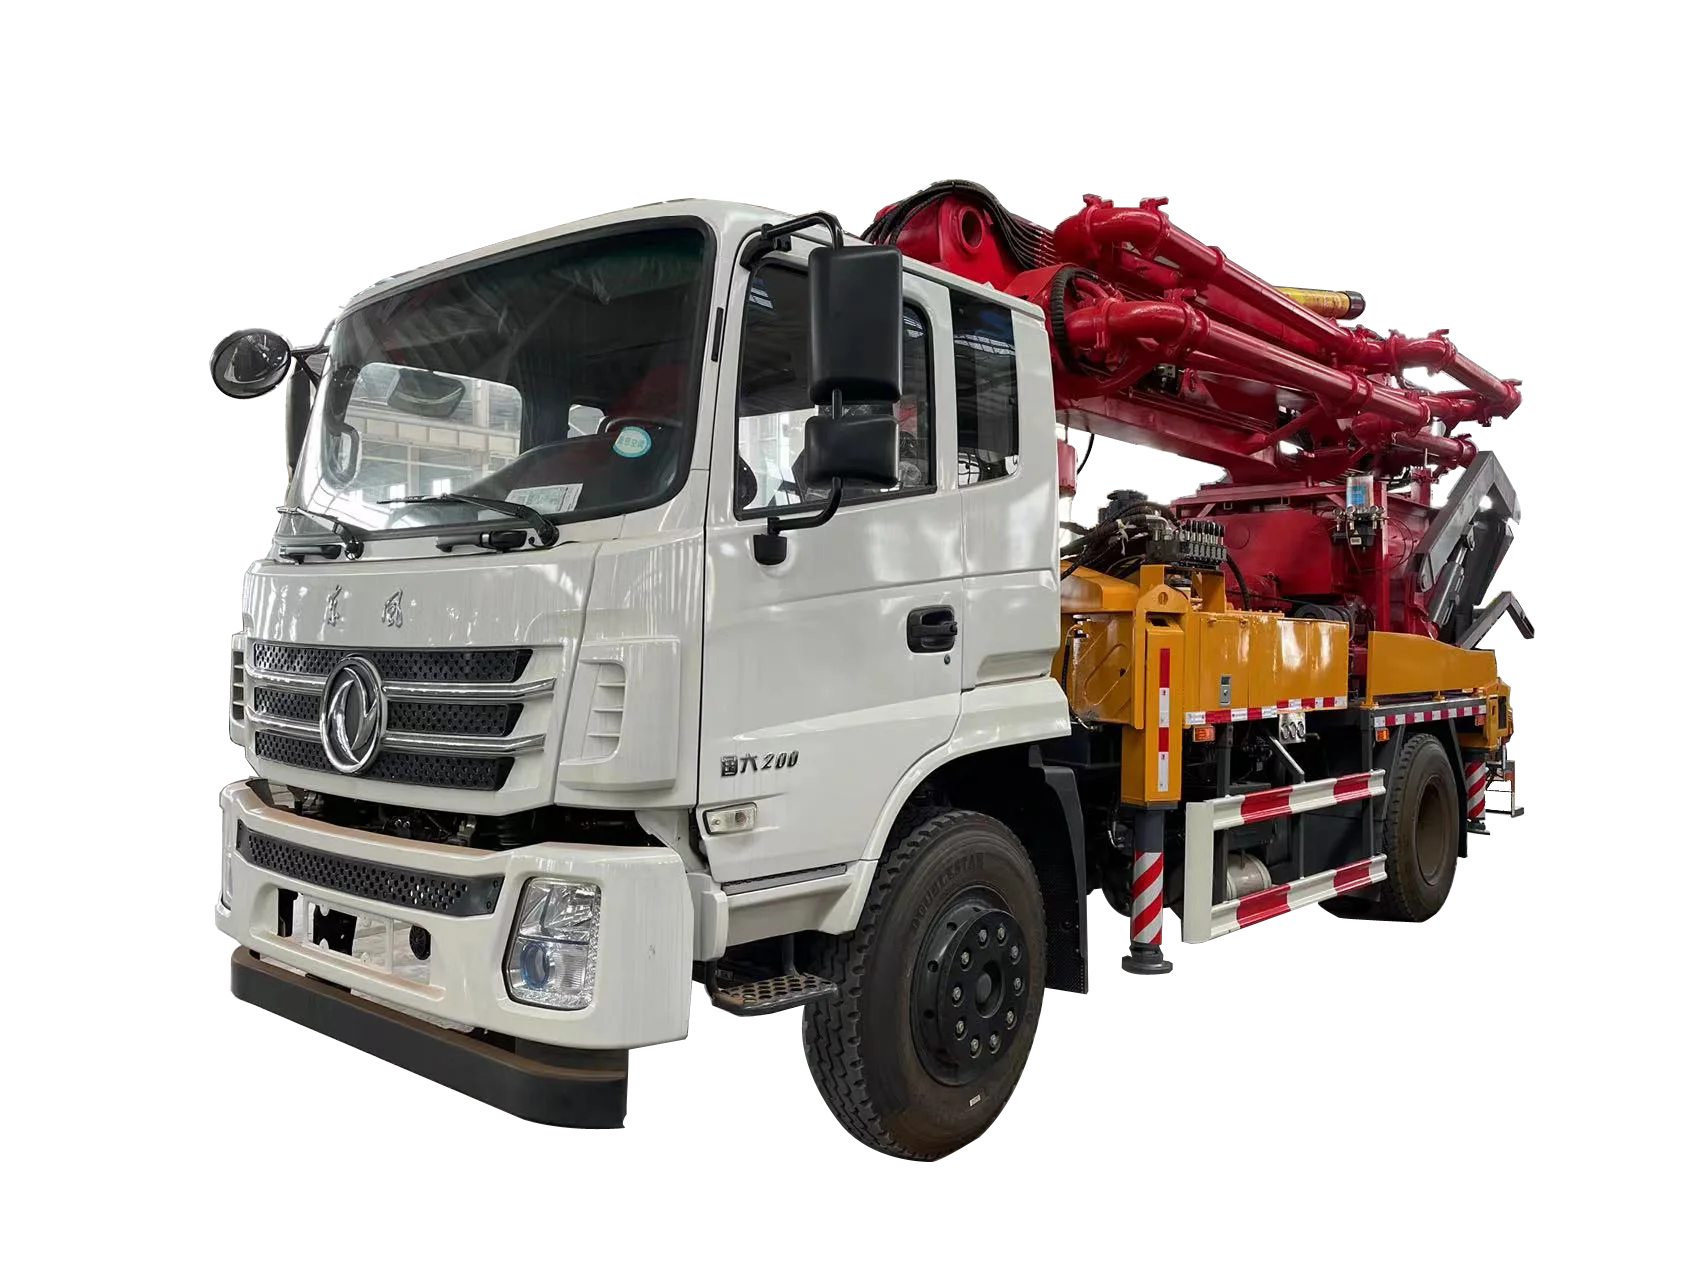 direct sale Concrete Spreader Dongfeng Chassis palcing boom truck mixer pump villa batch plant